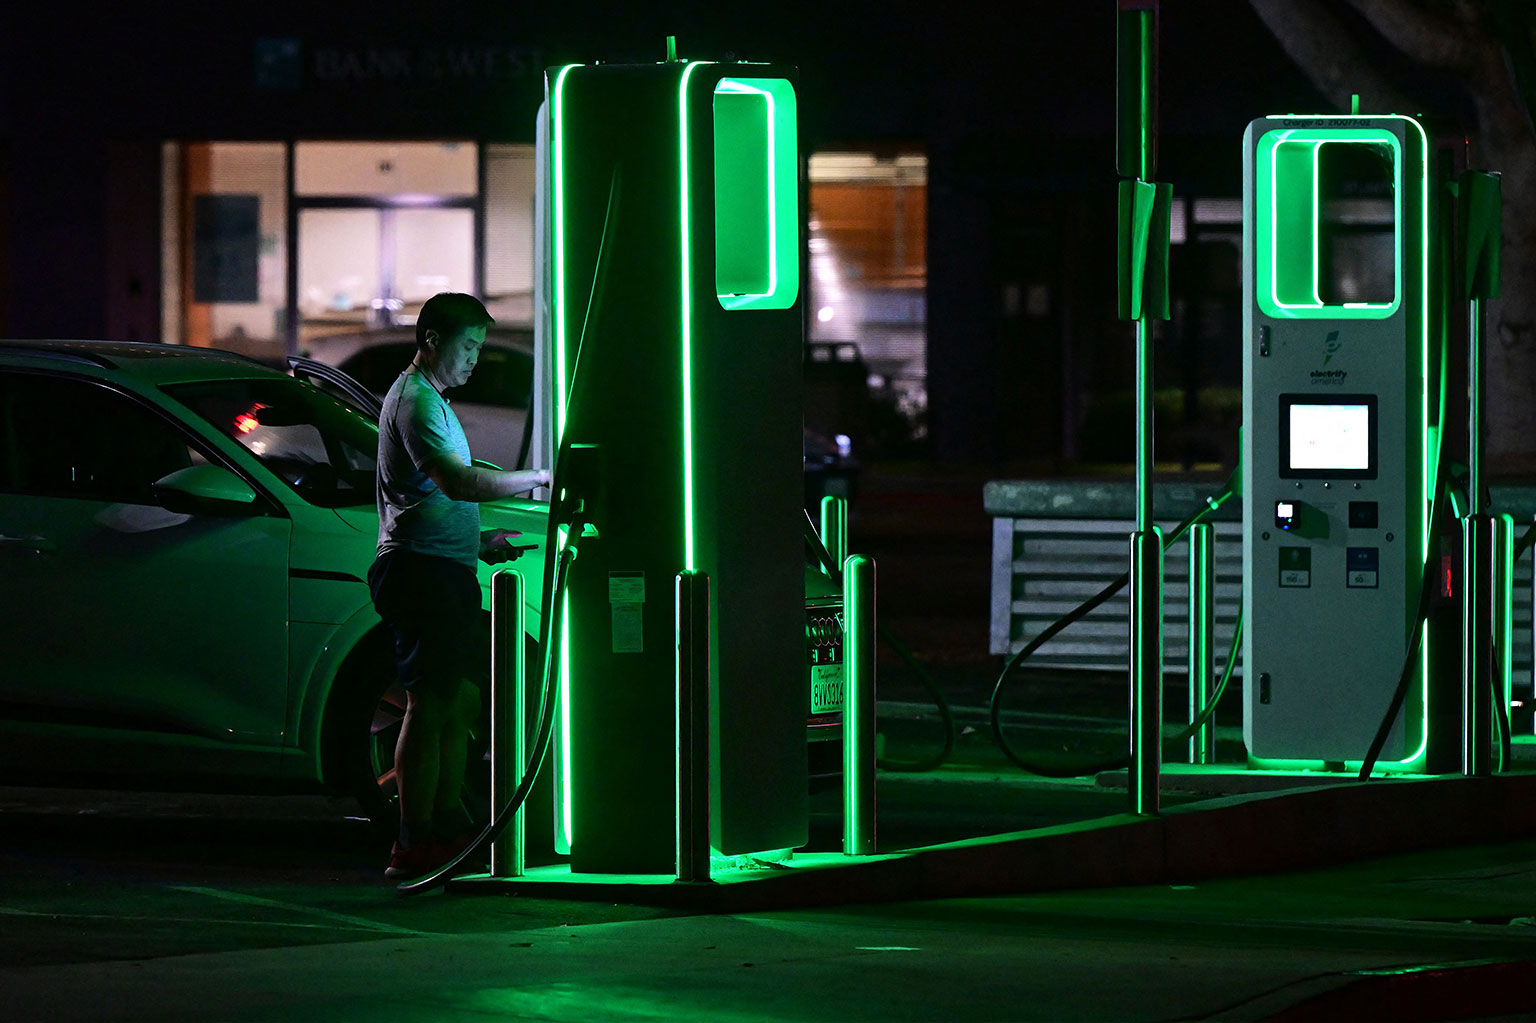 A driver, illuminated by the green, glowing charging station, charges their electric vehicle